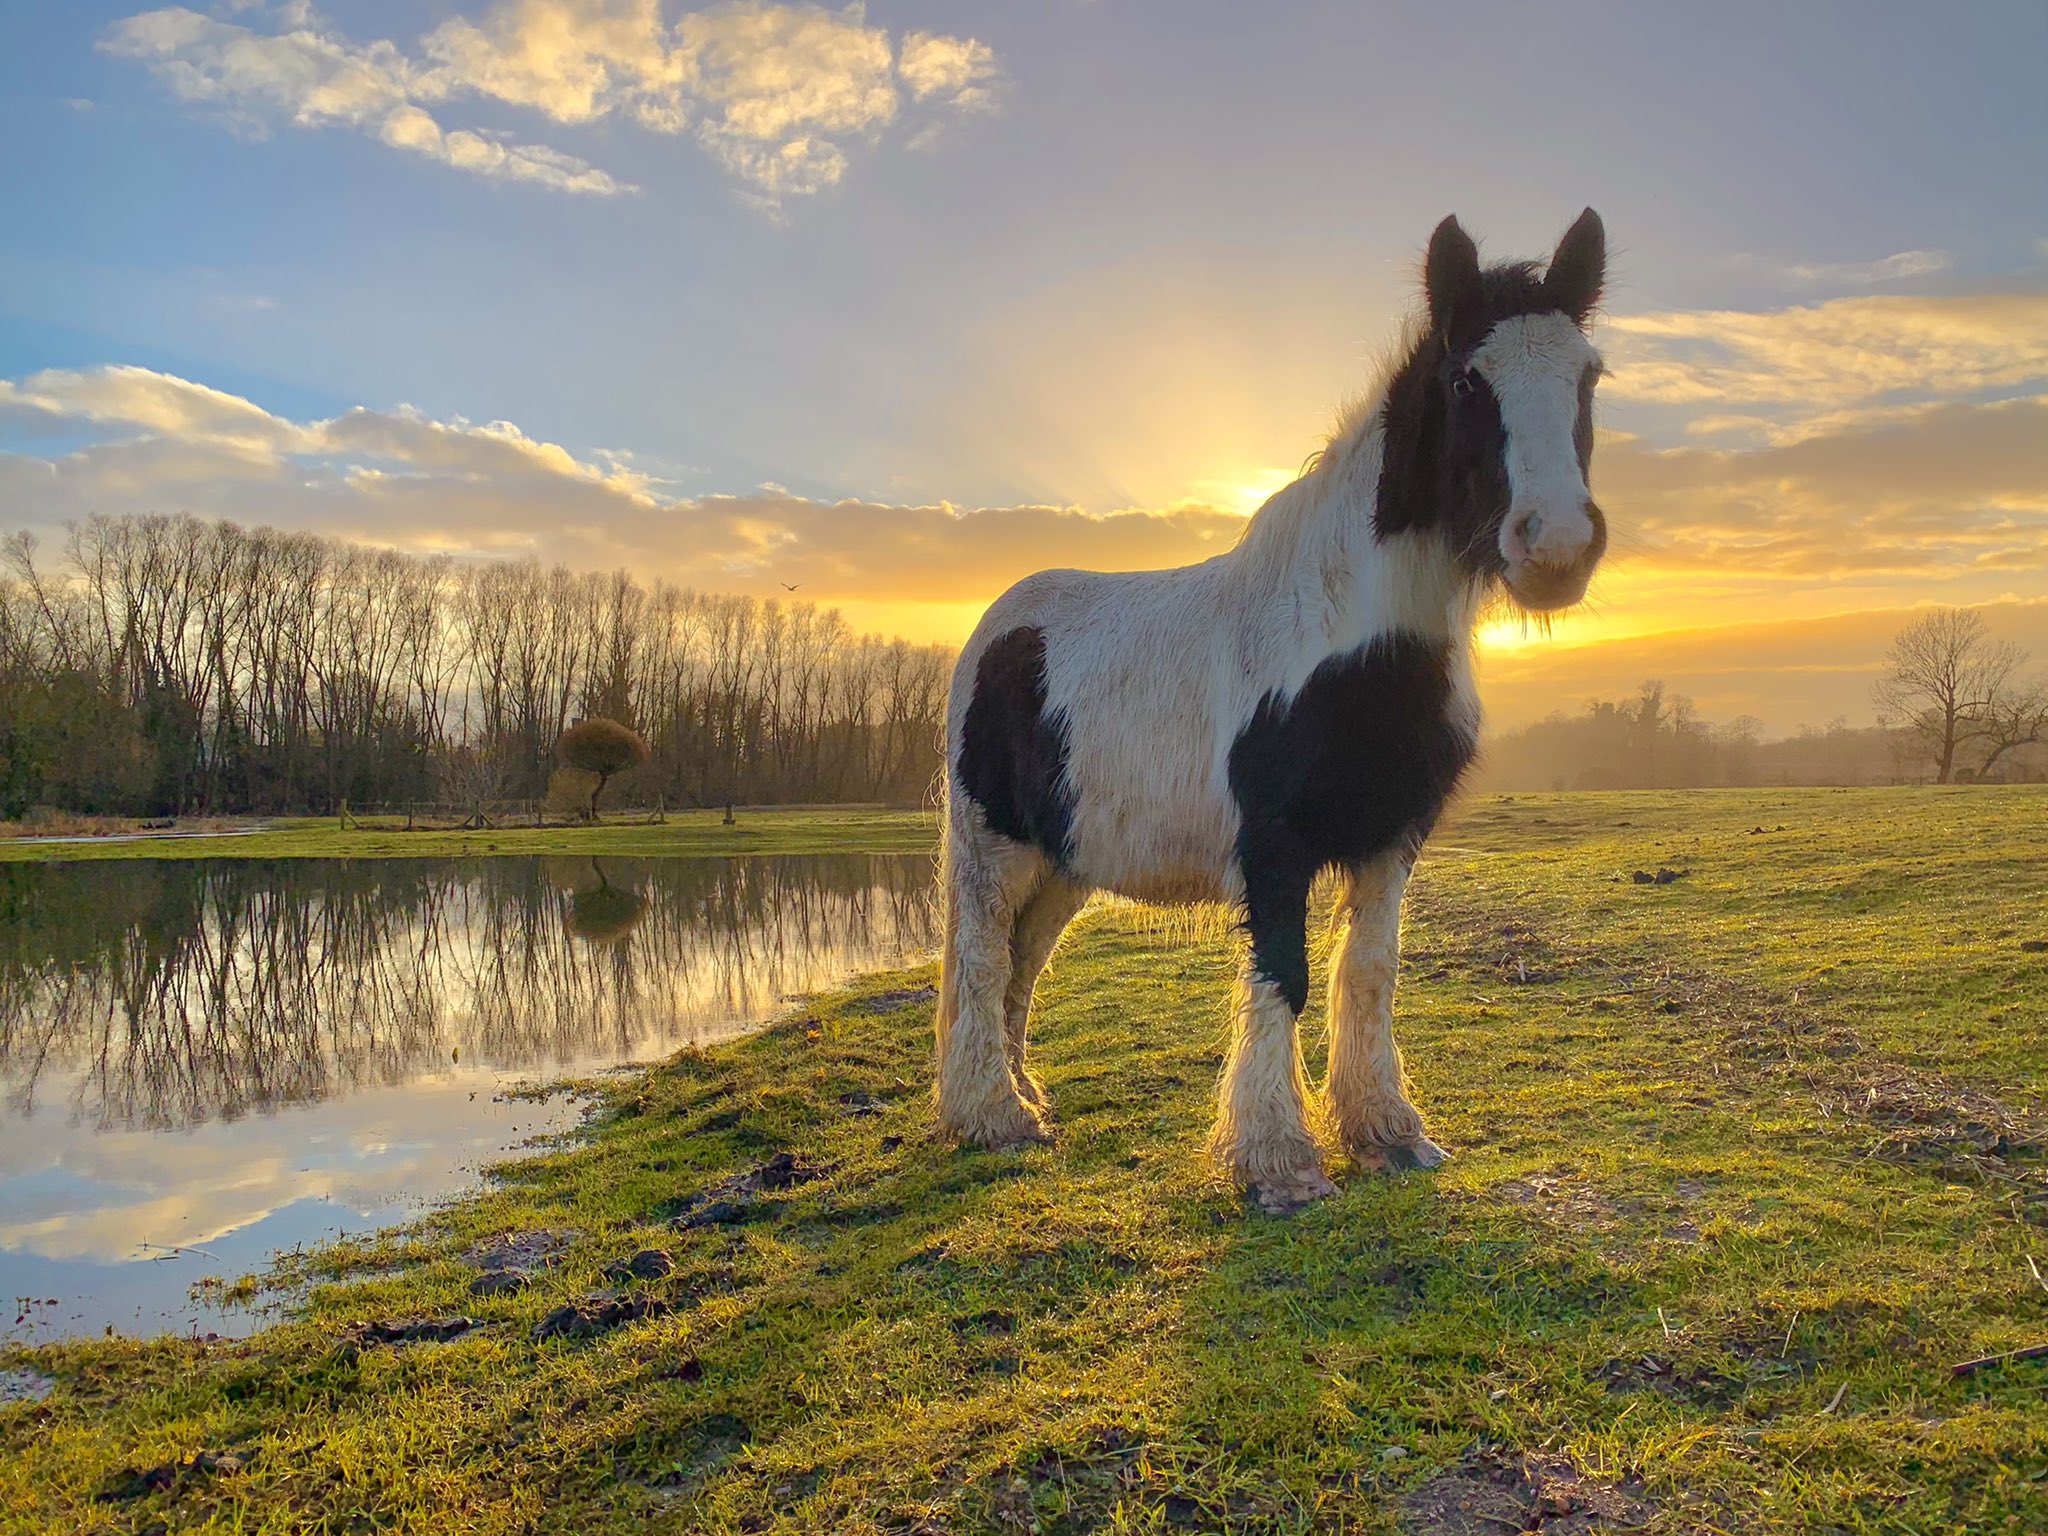 1st Place Grazing horse at sunset near the lake in Colney, Norfolk by WalkingTractor @TractorWalking